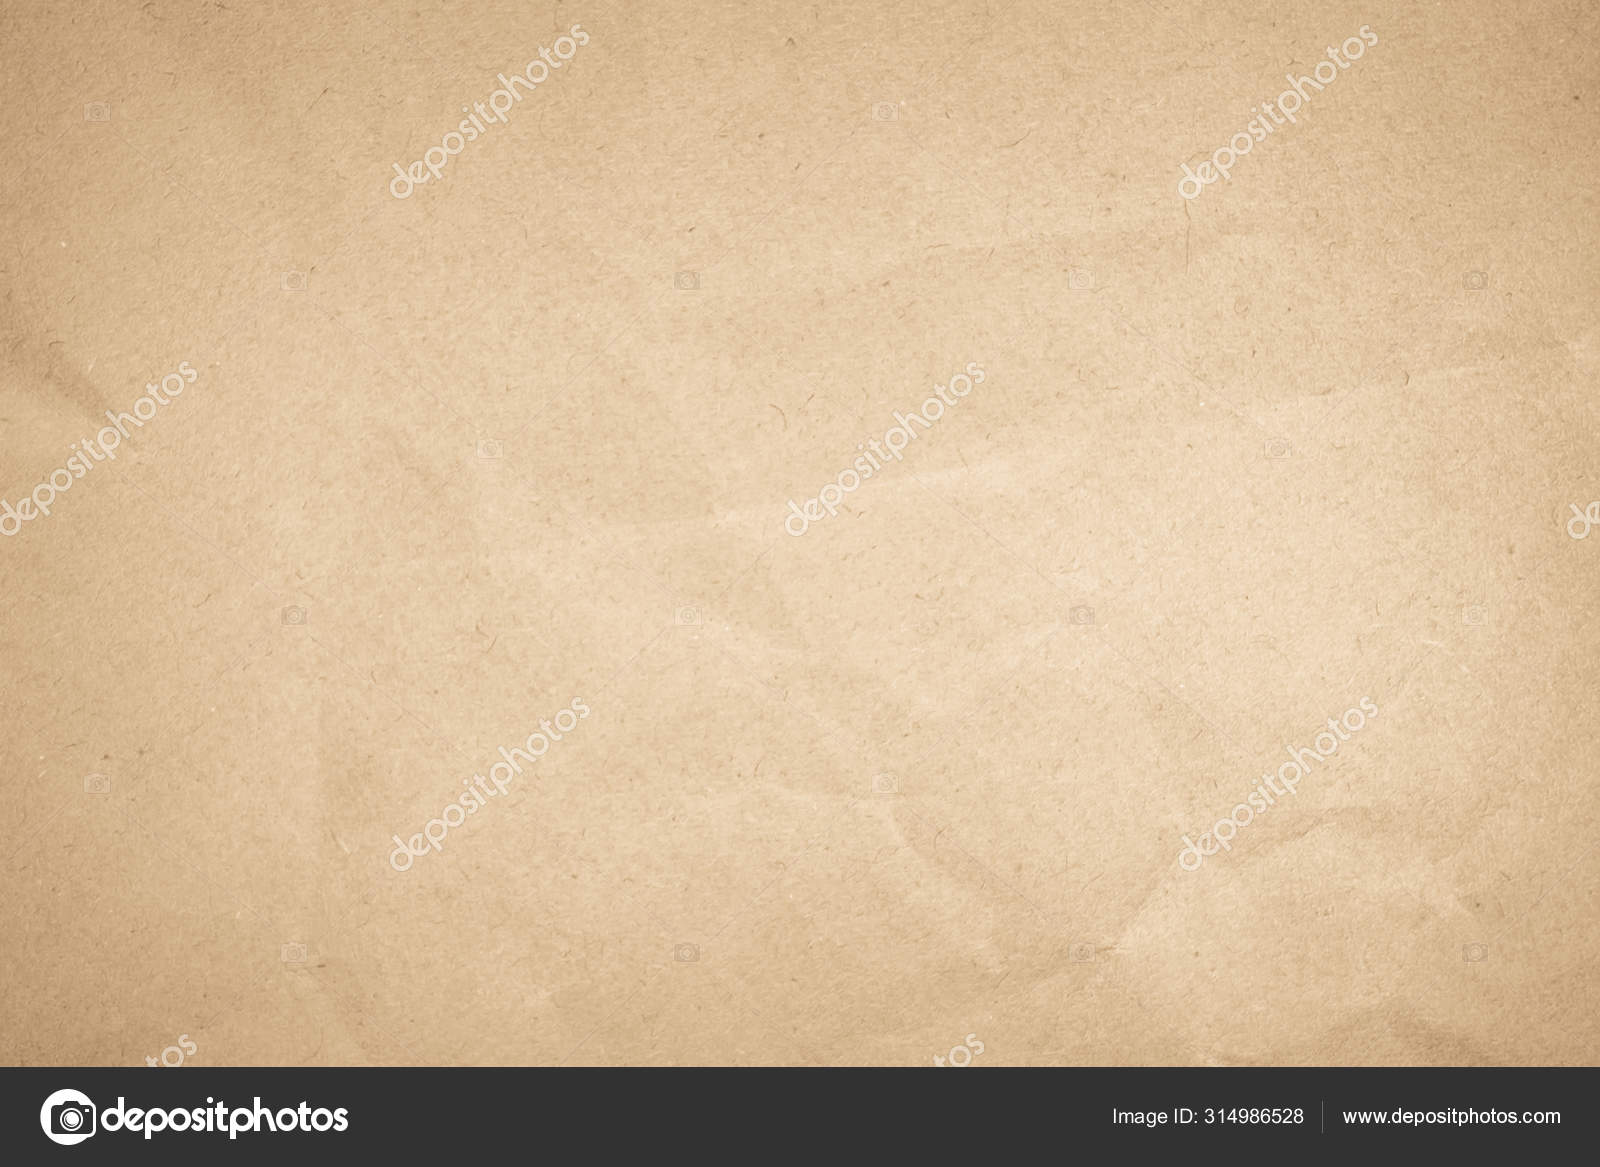 Brown or cream recycled craft paper with a textured background